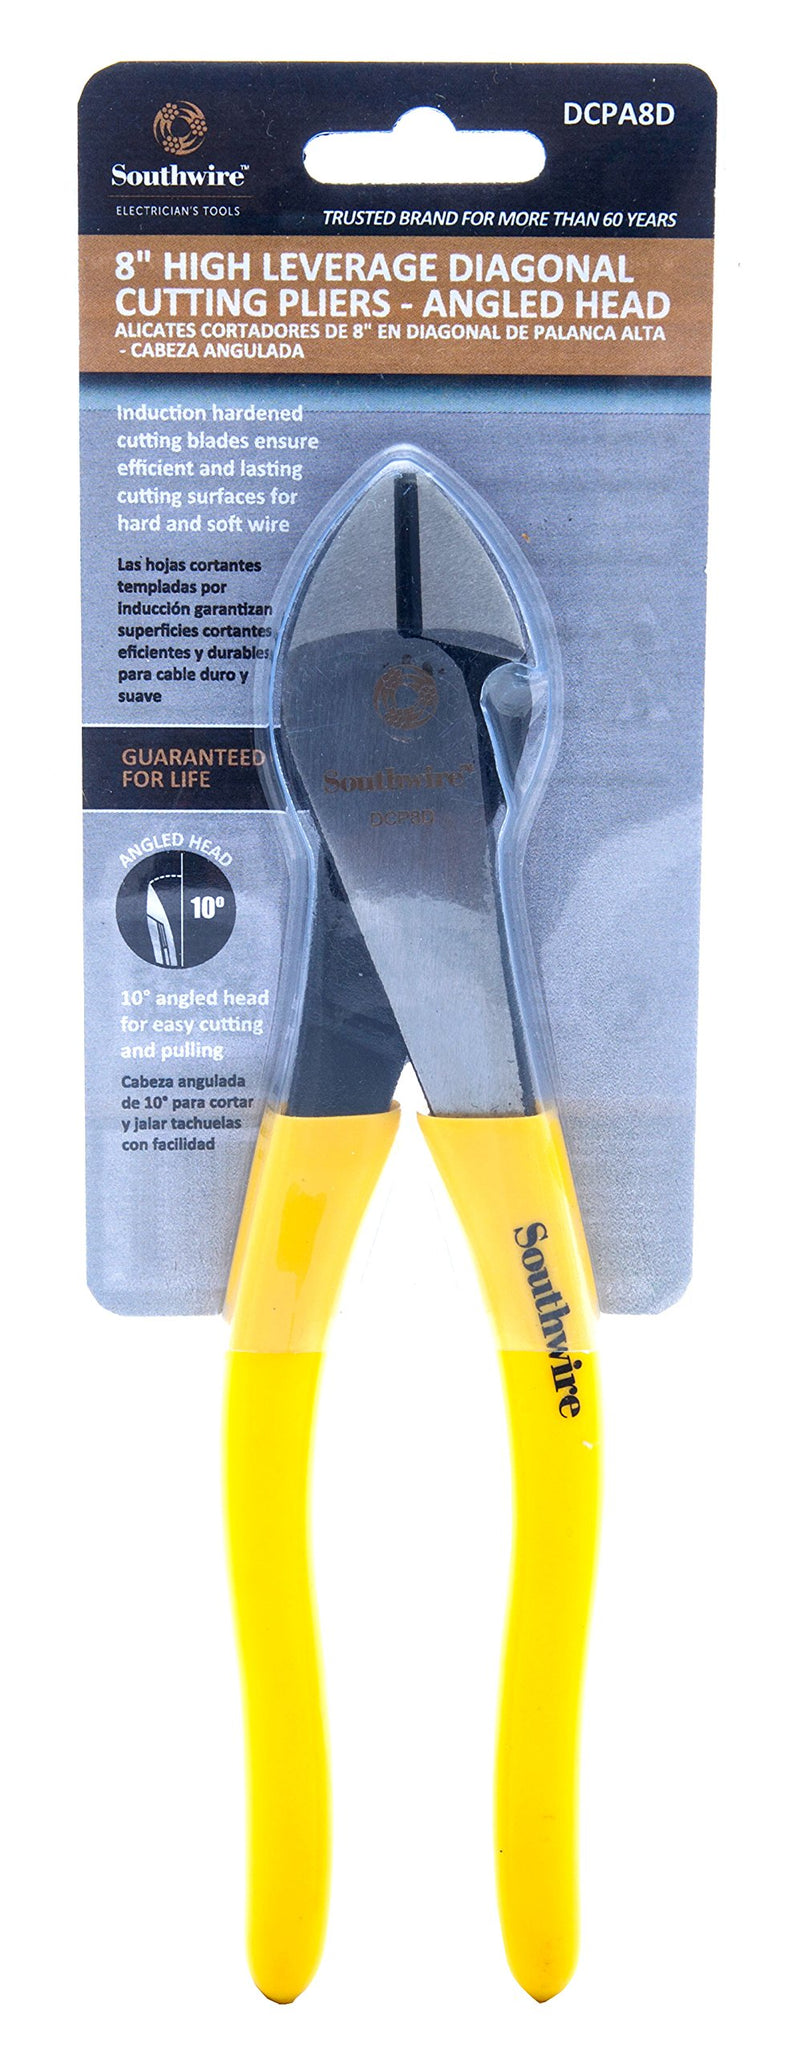 Southwire Tools & Equipment DCPA8D 8" Angled Head High-Leverage Diagonal Cutting Pliers with Dipped Handles Dipped Grip and Angled Head - LeoForward Australia